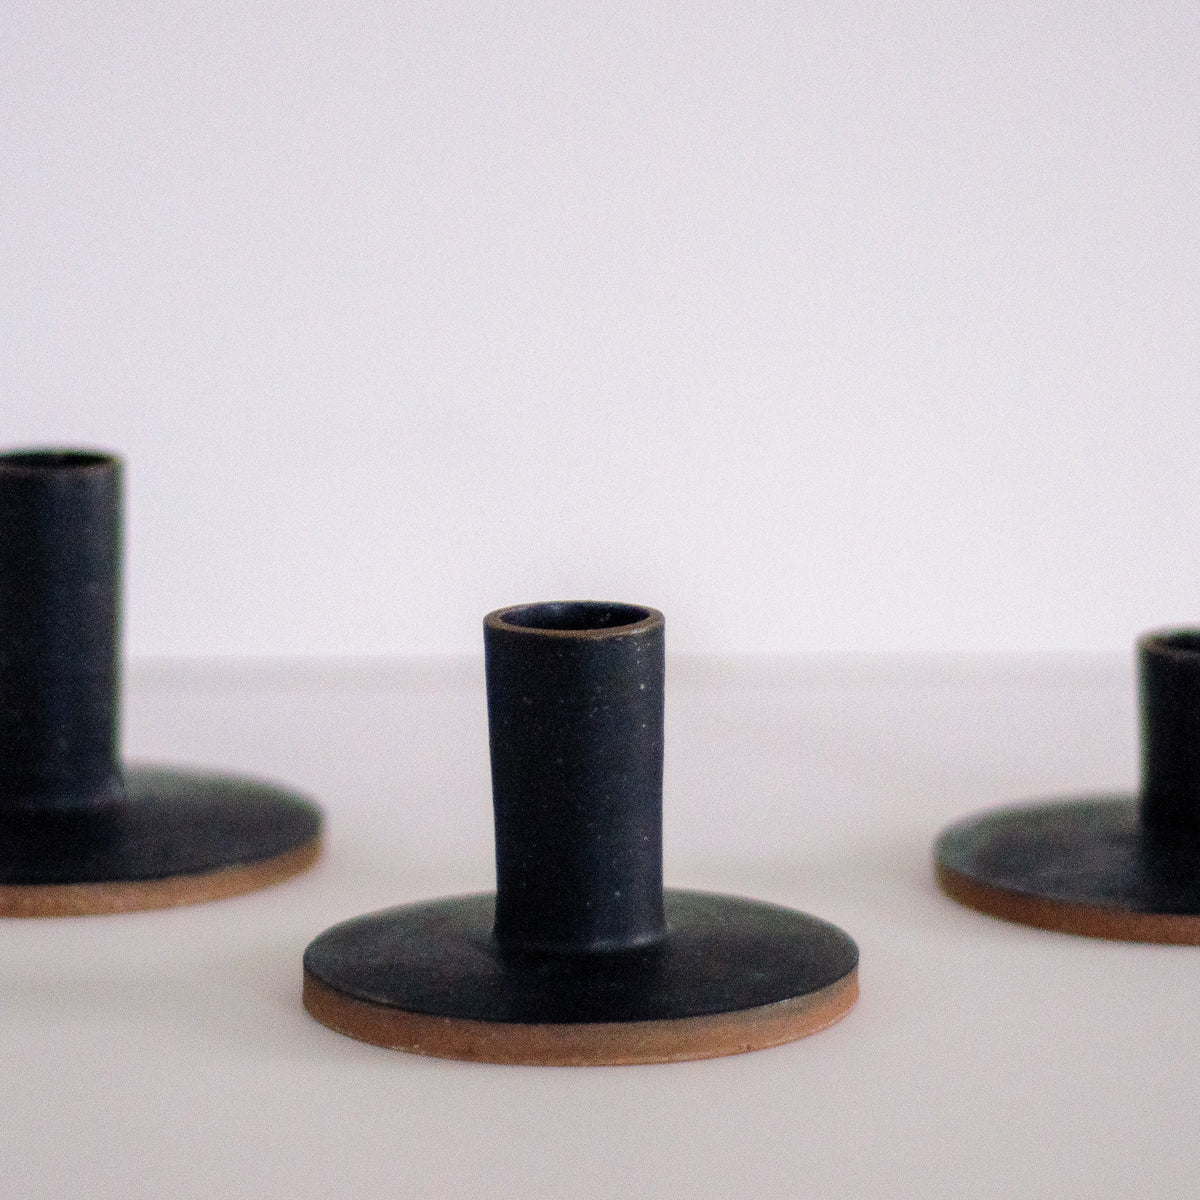 three black taper candle holders on a neutral surface, with one in focus and the others out of focus.